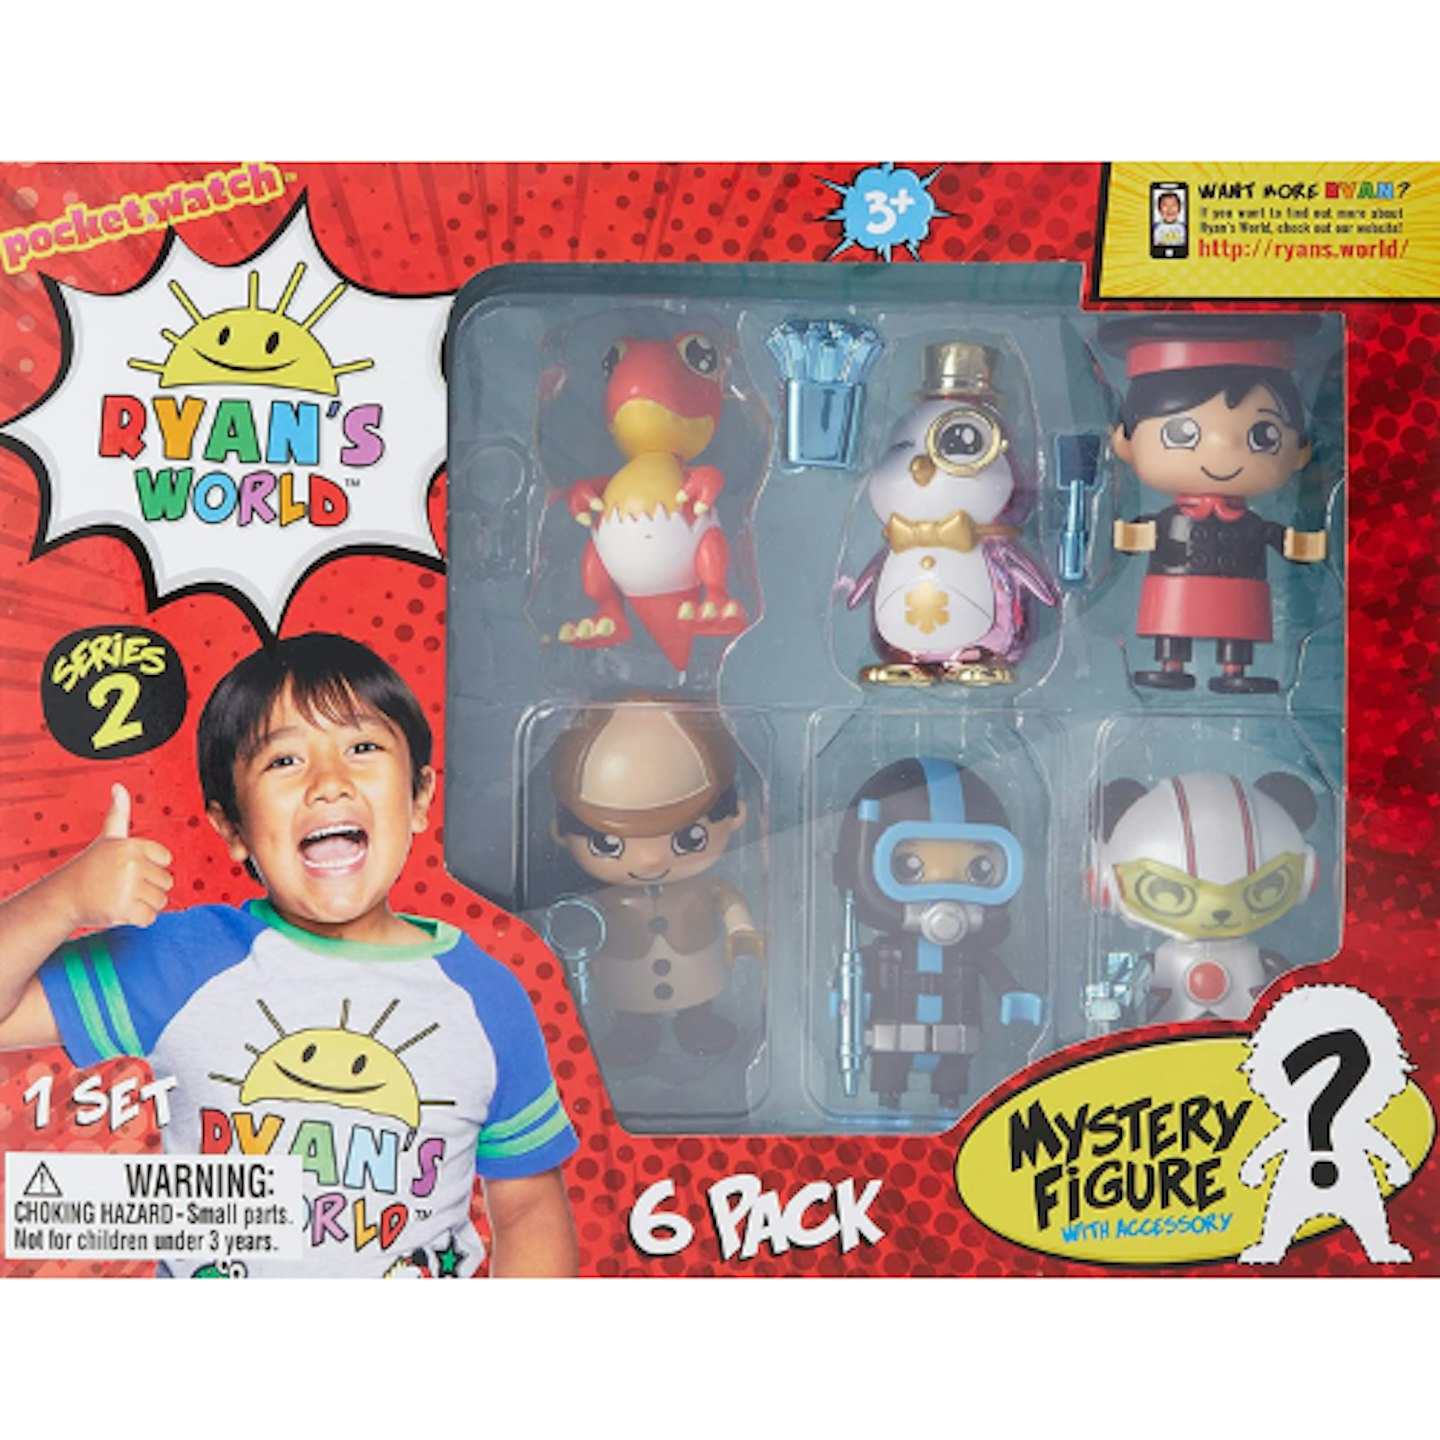 Ryan's World 6 Pack Collectible Mystery Figure Set